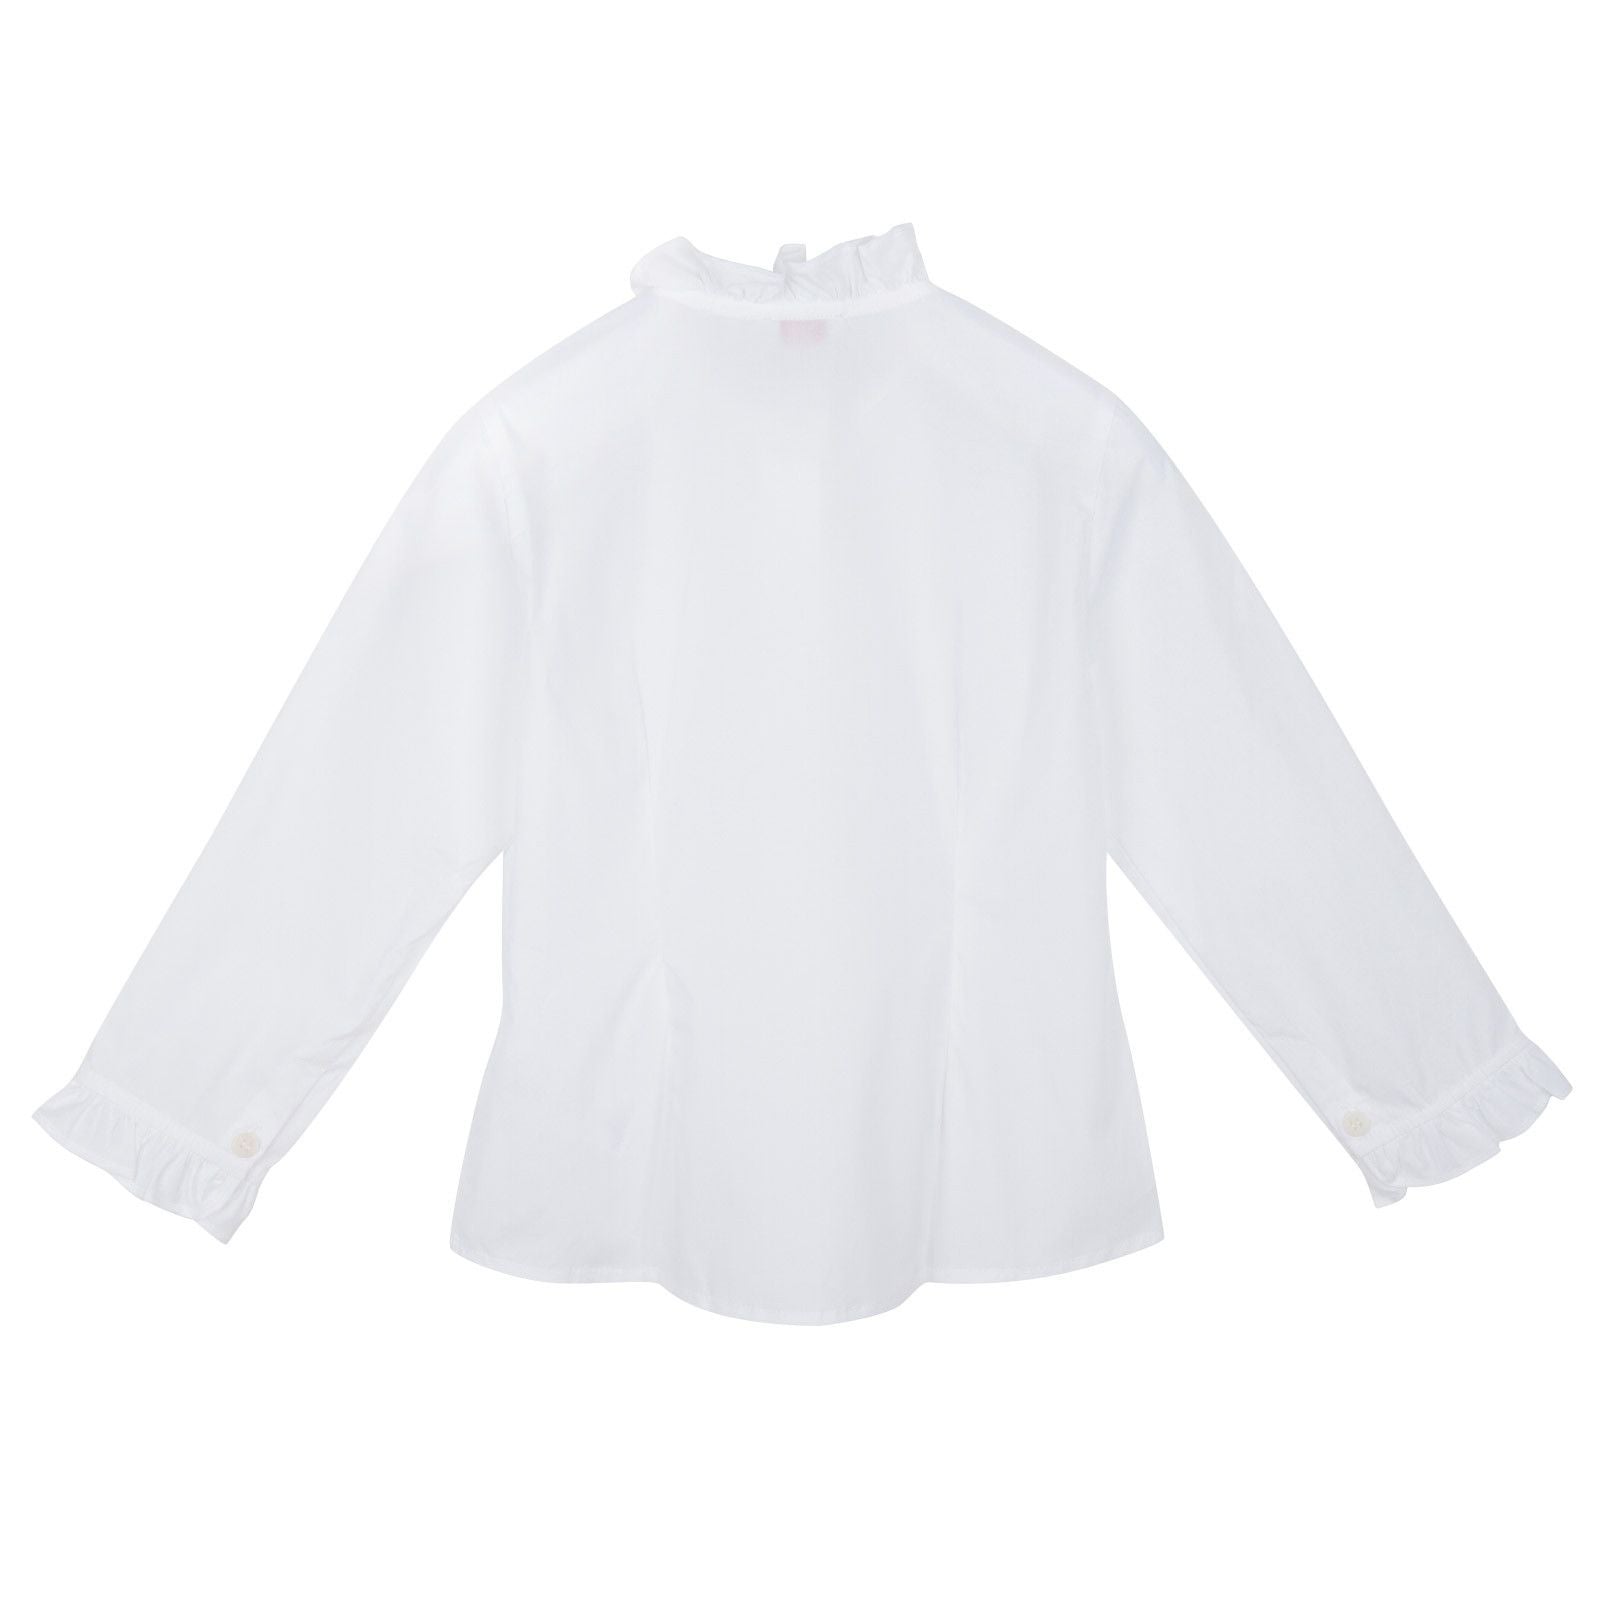 Girls White Jersey Blouse With Frilly Collar and Cuffs - CÉMAROSE | Children's Fashion Store - 2